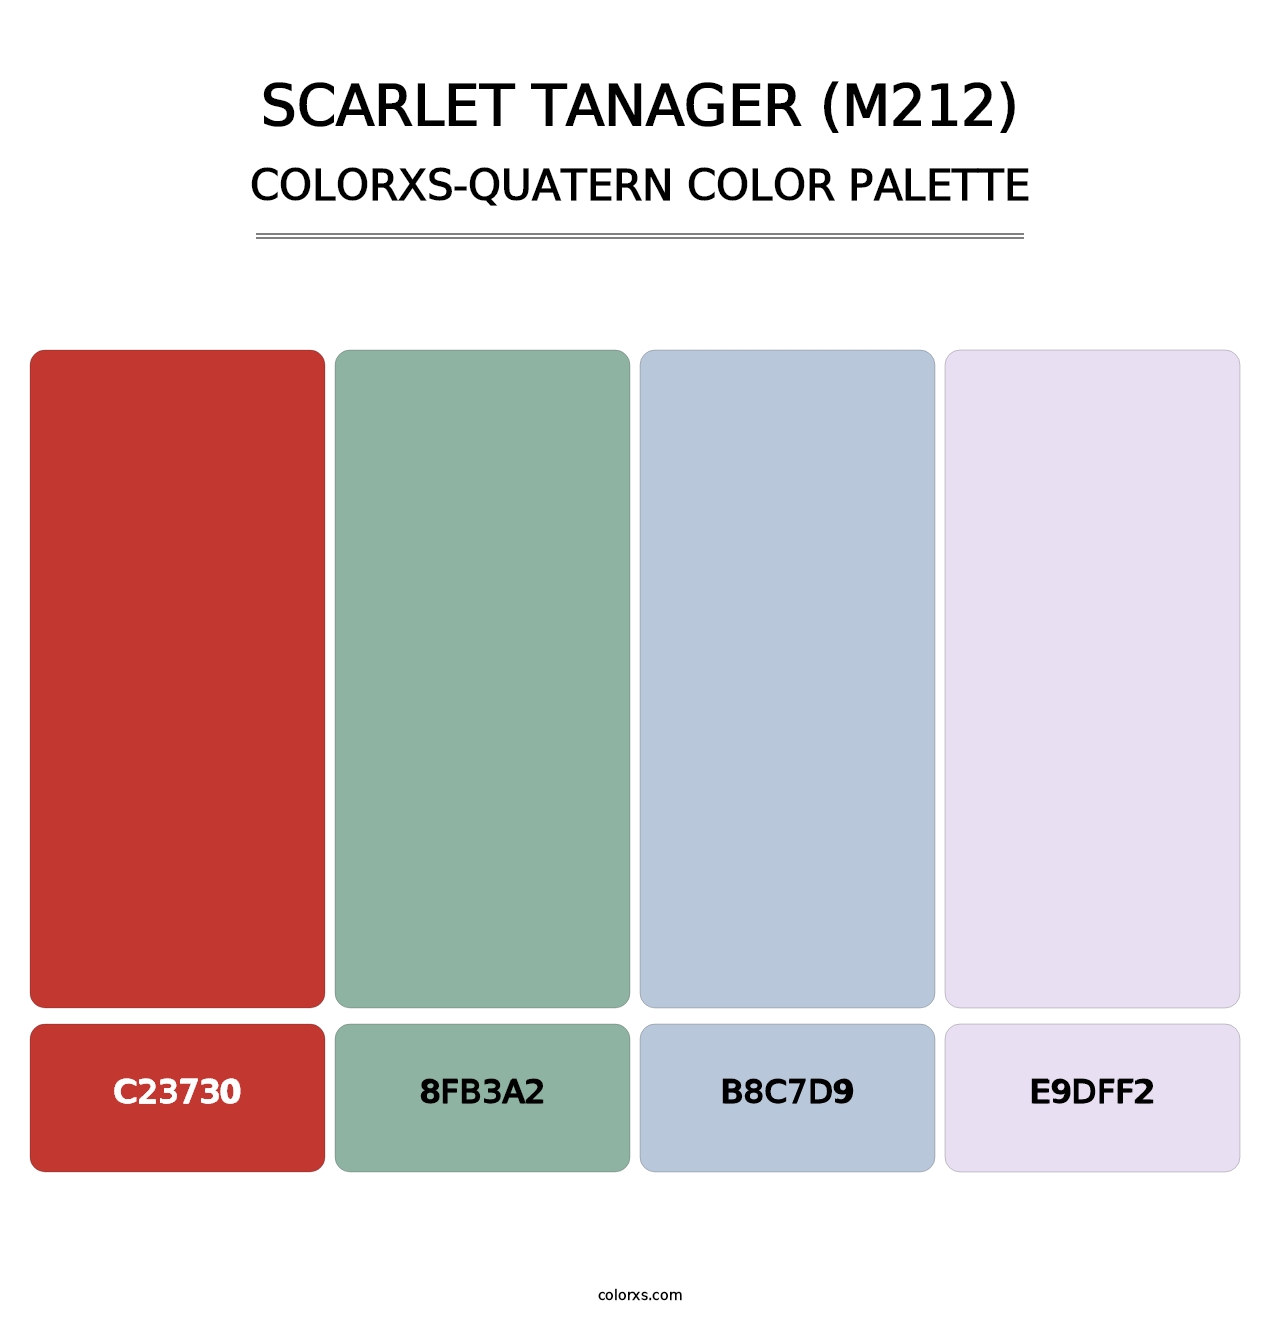 Scarlet Tanager (M212) - Colorxs Quatern Palette